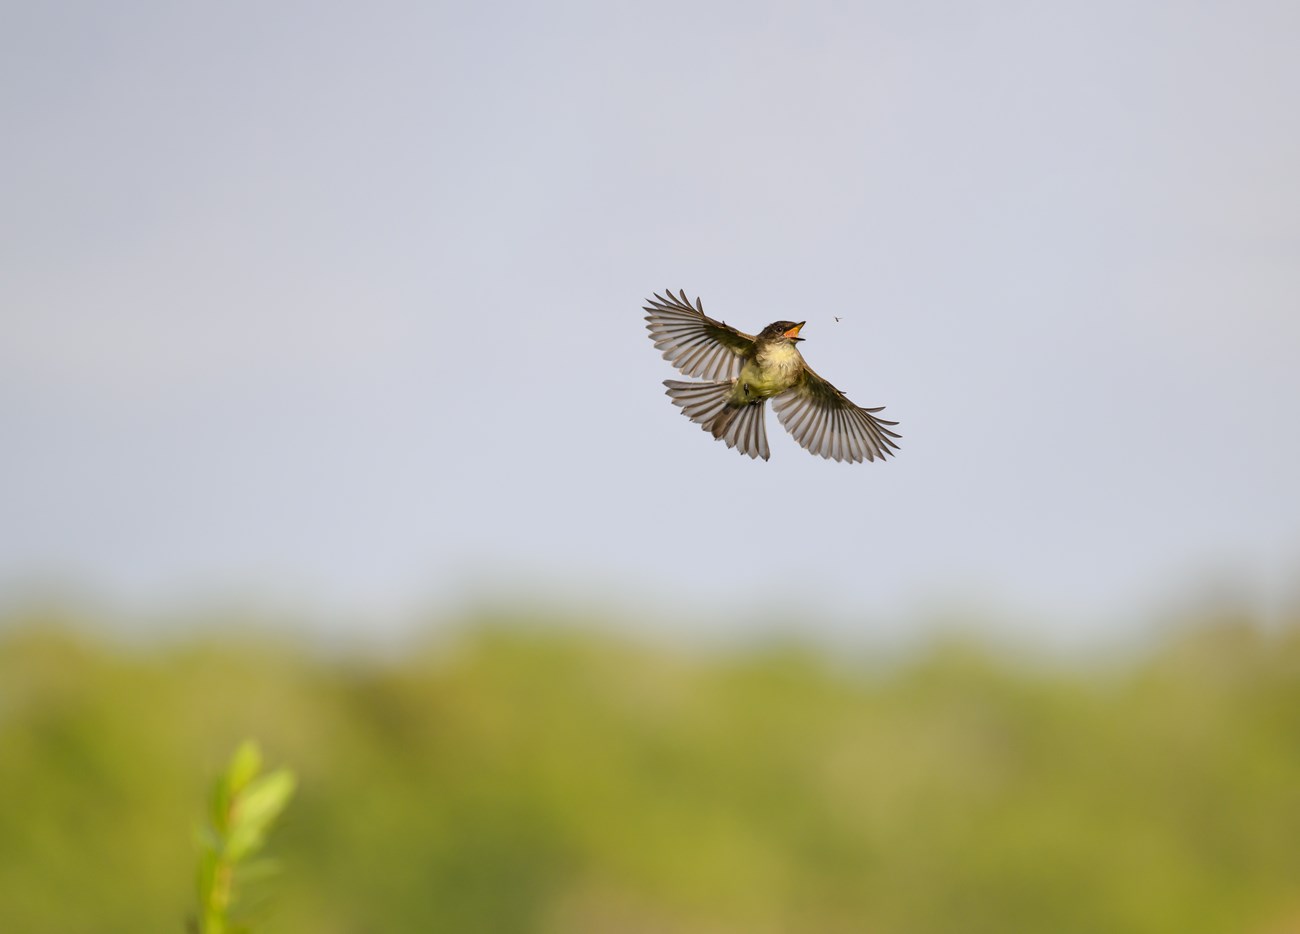 An eastern phoebe extends its wings and tail feathers while in flight to catch an insect.